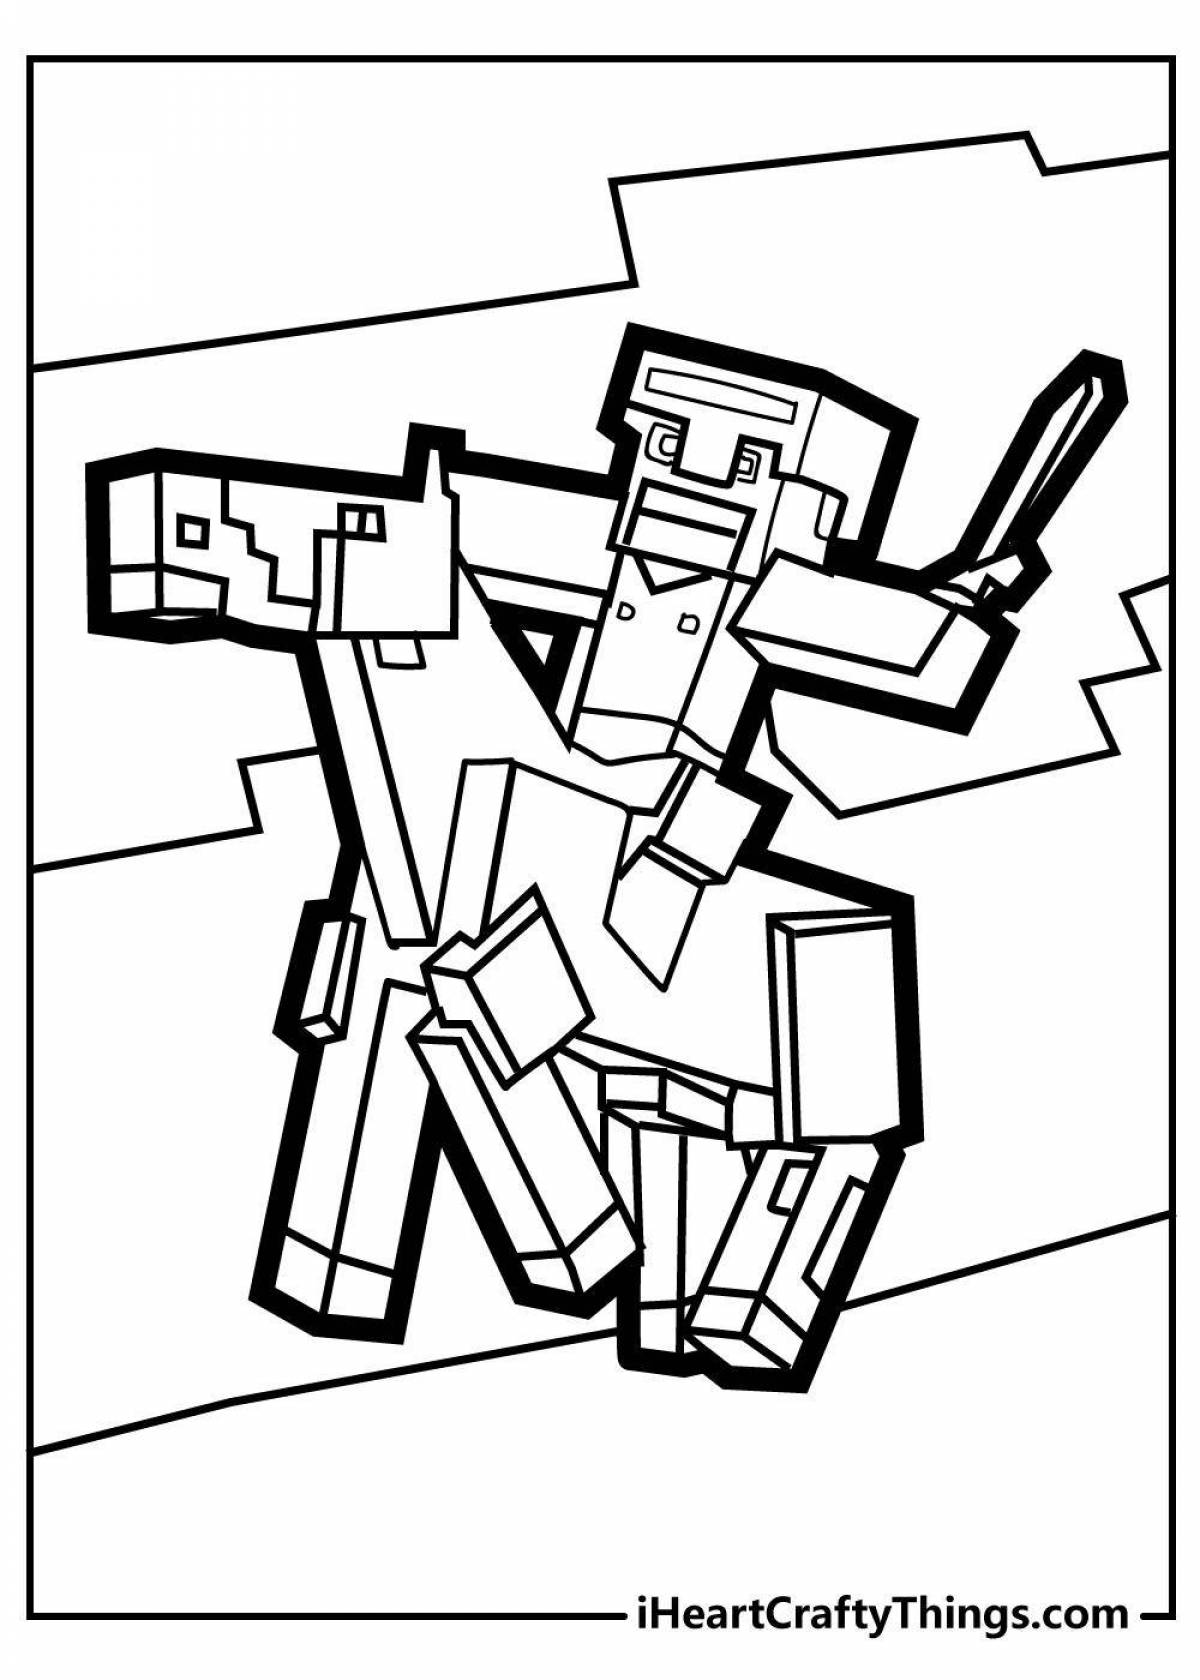 Exciting minecraft cow coloring page